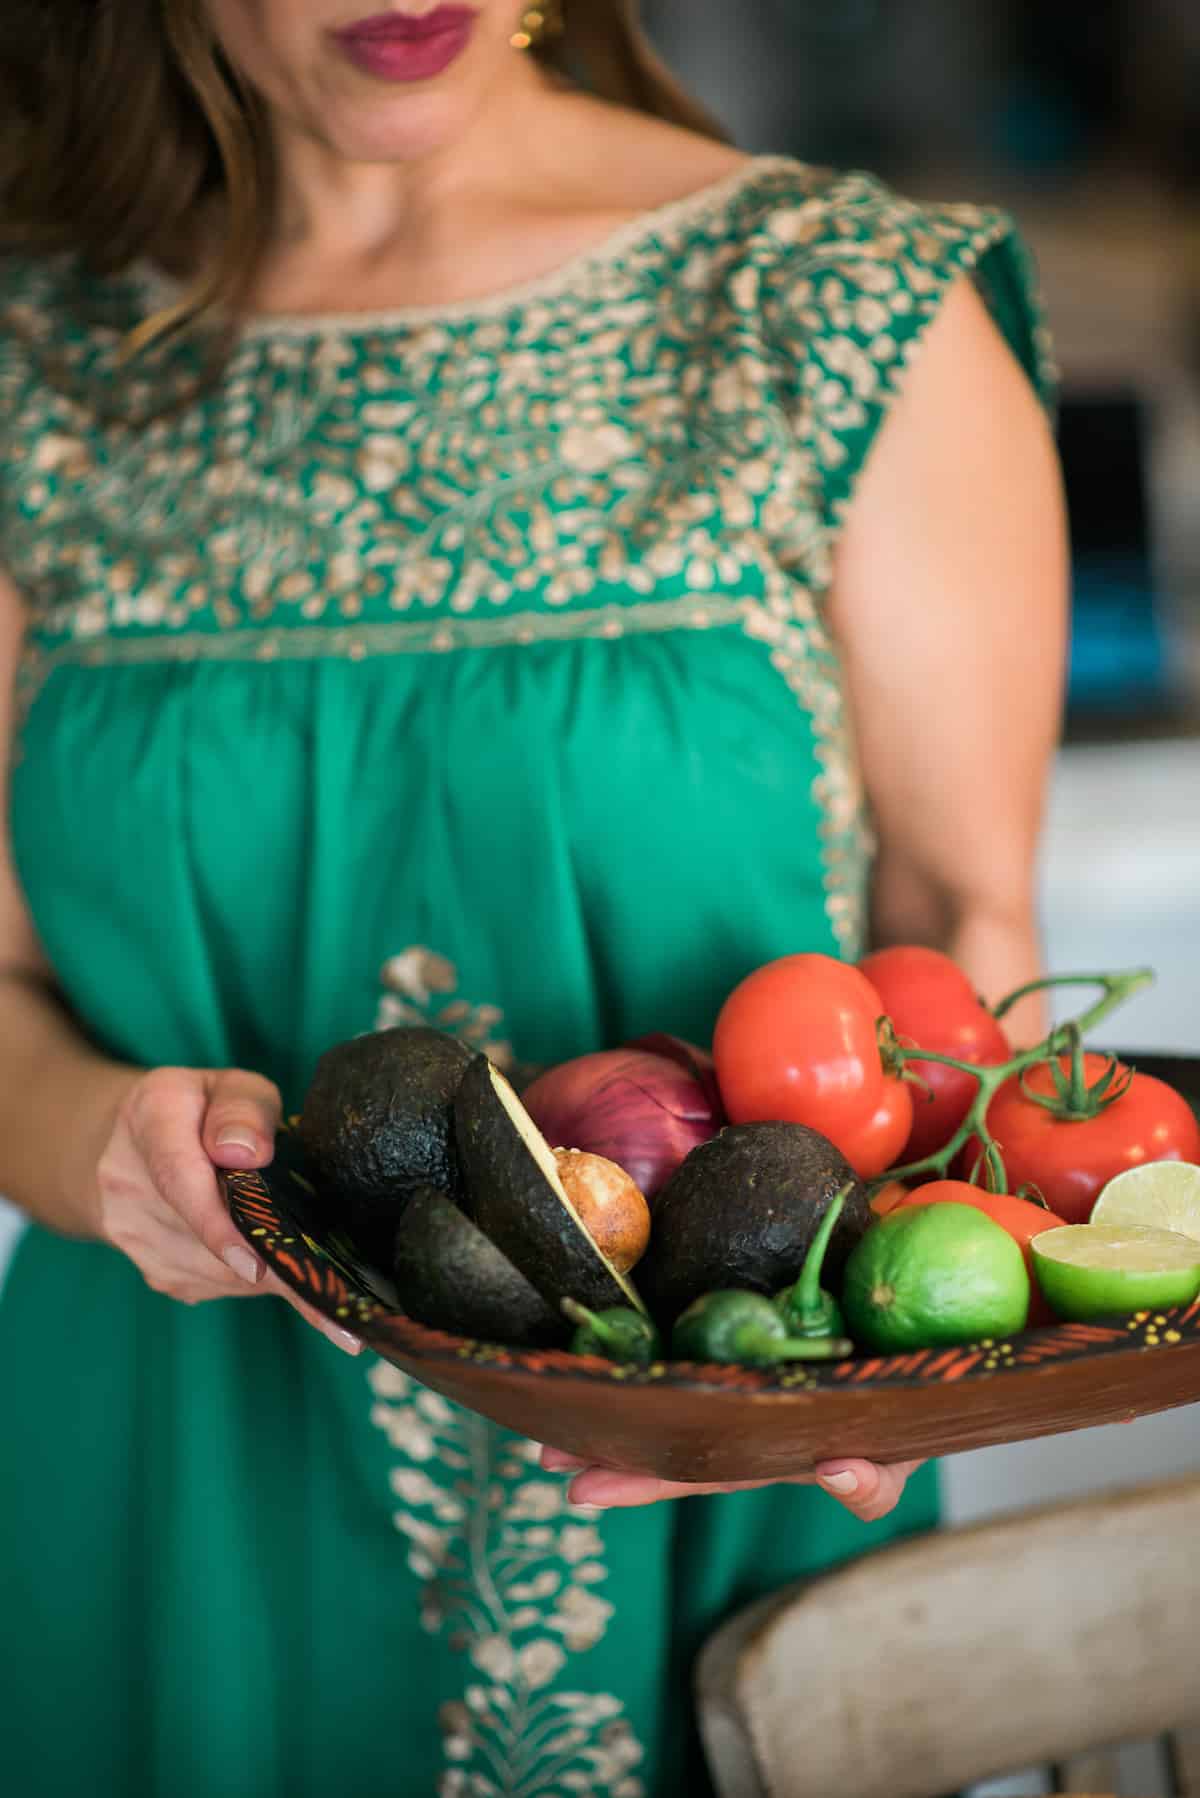 latina blogger holding a wooden bowl filled with tomatoes on the vine, fresh limes, red onion, jalapenos, and avocado for making traditional guacamole.